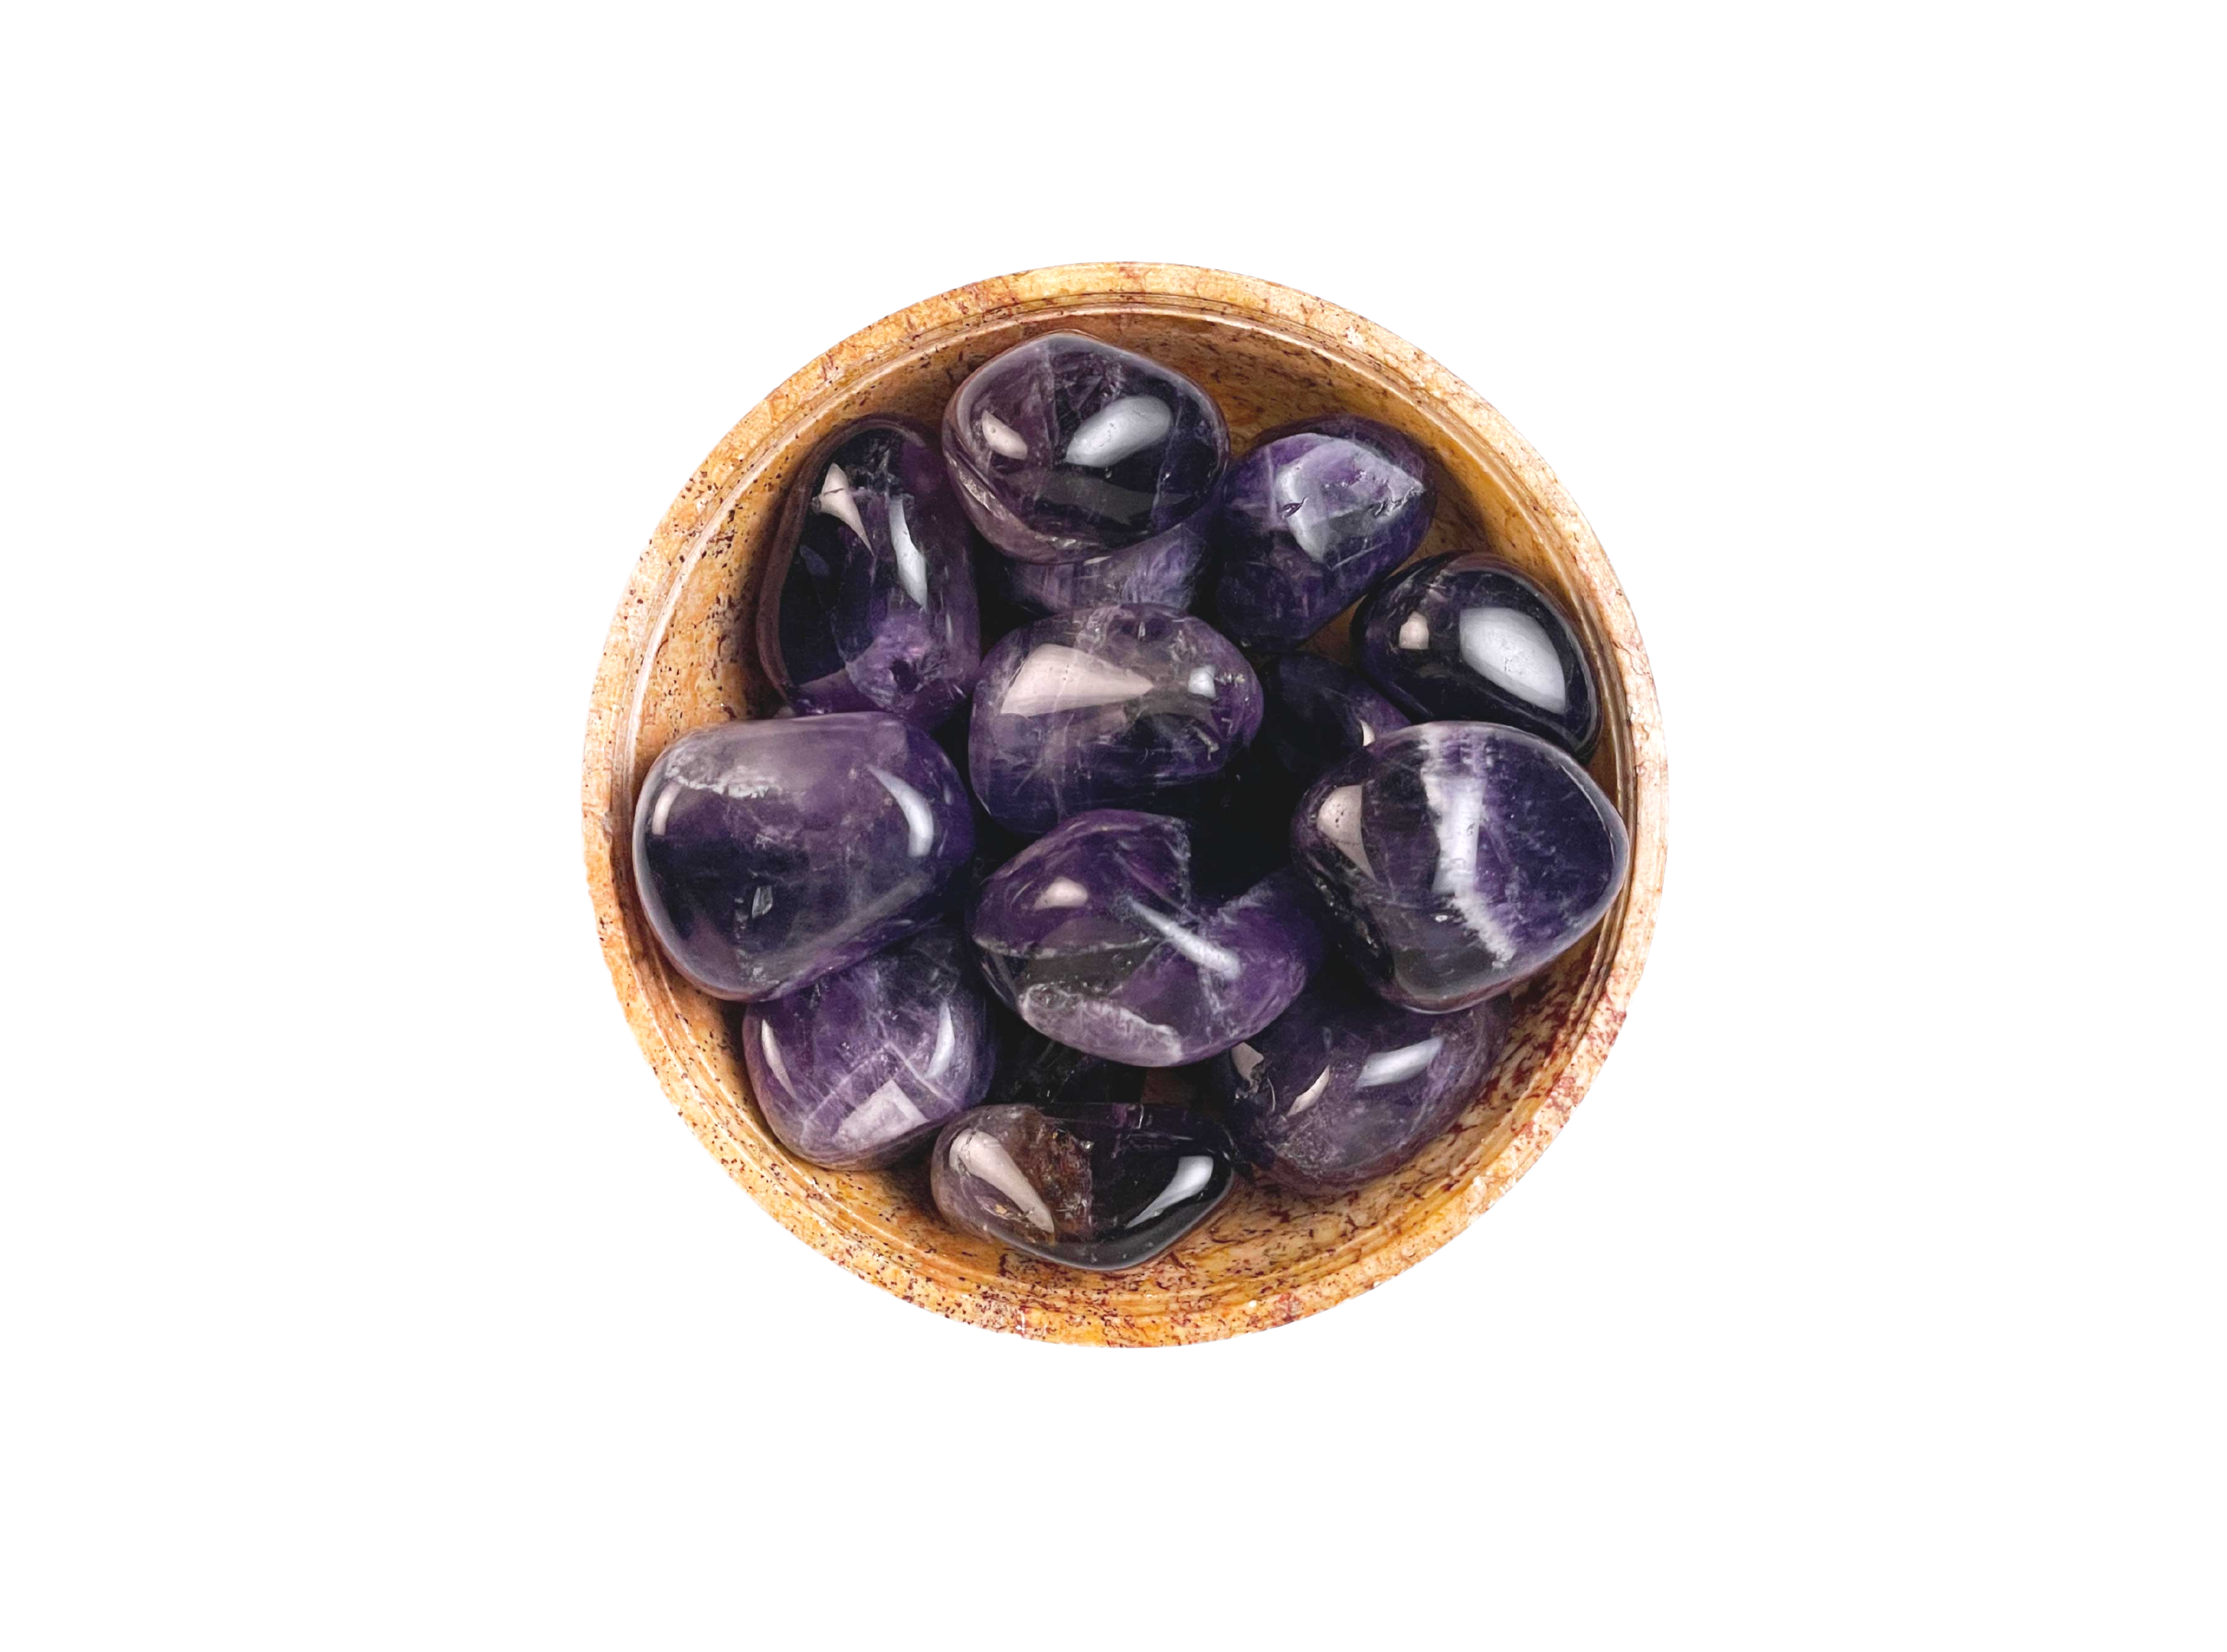 Buy Online Latest and Unique Tumbled Amethyst - Protection, Purification, Divine Connection & Release of Addictions | Shop Best Spiritual Items - The Mystical Ritual